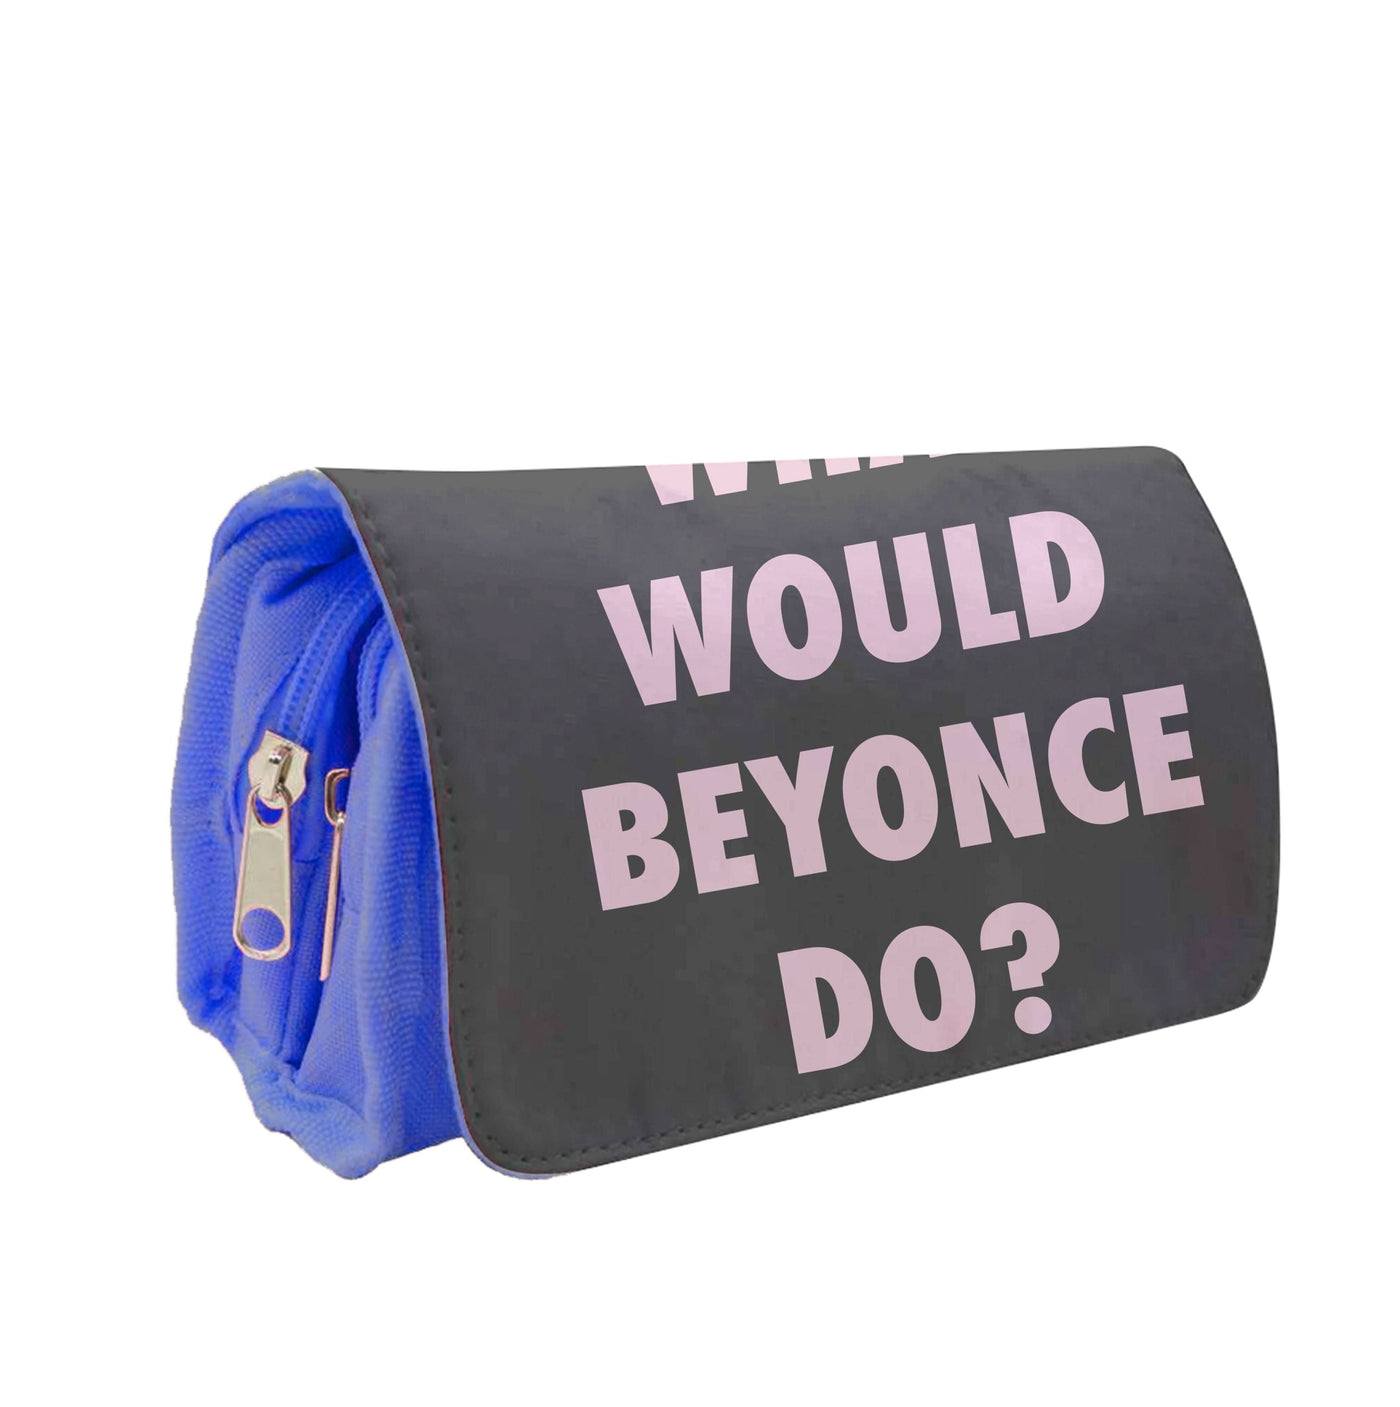 What Would Beyonce Do? Pencil Case